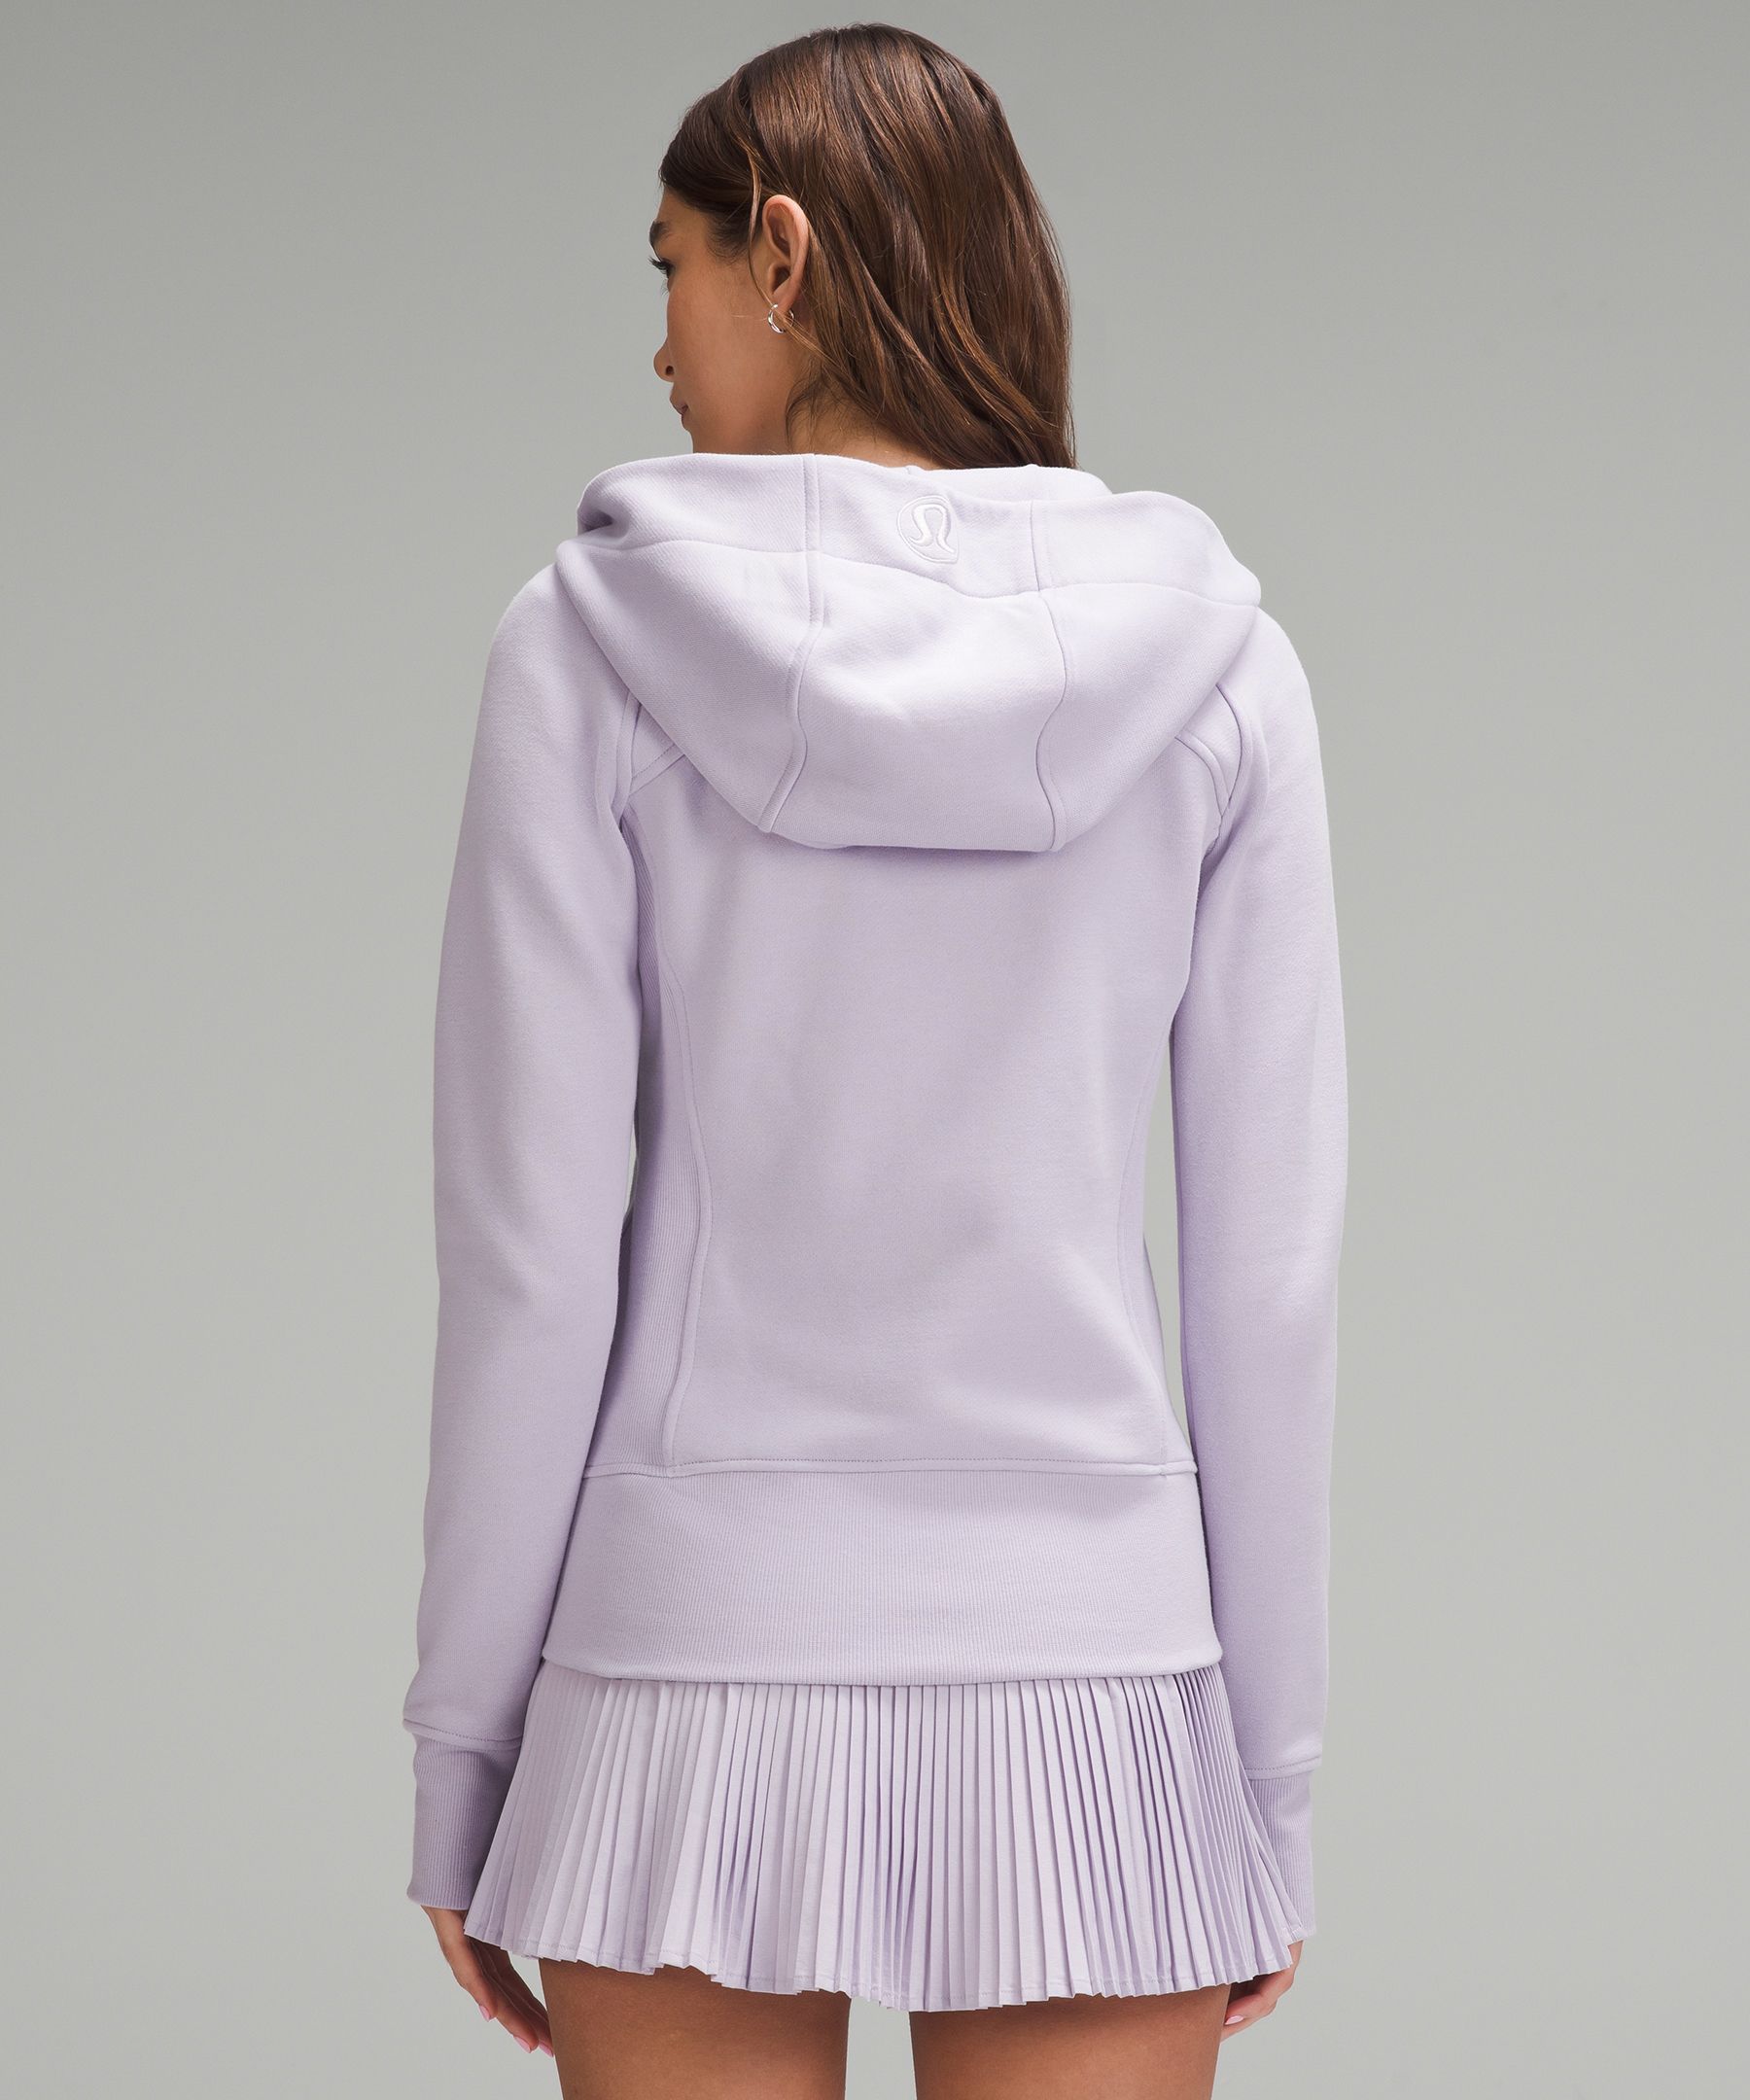 Embroidered Scuba Lilac Hoodie For Women Half Zip Define Yoga Sweatshirt  With Label Designer Gym Sportswear For Outdoor Sports And Jogging Size 12  From Clothing893, $37.69